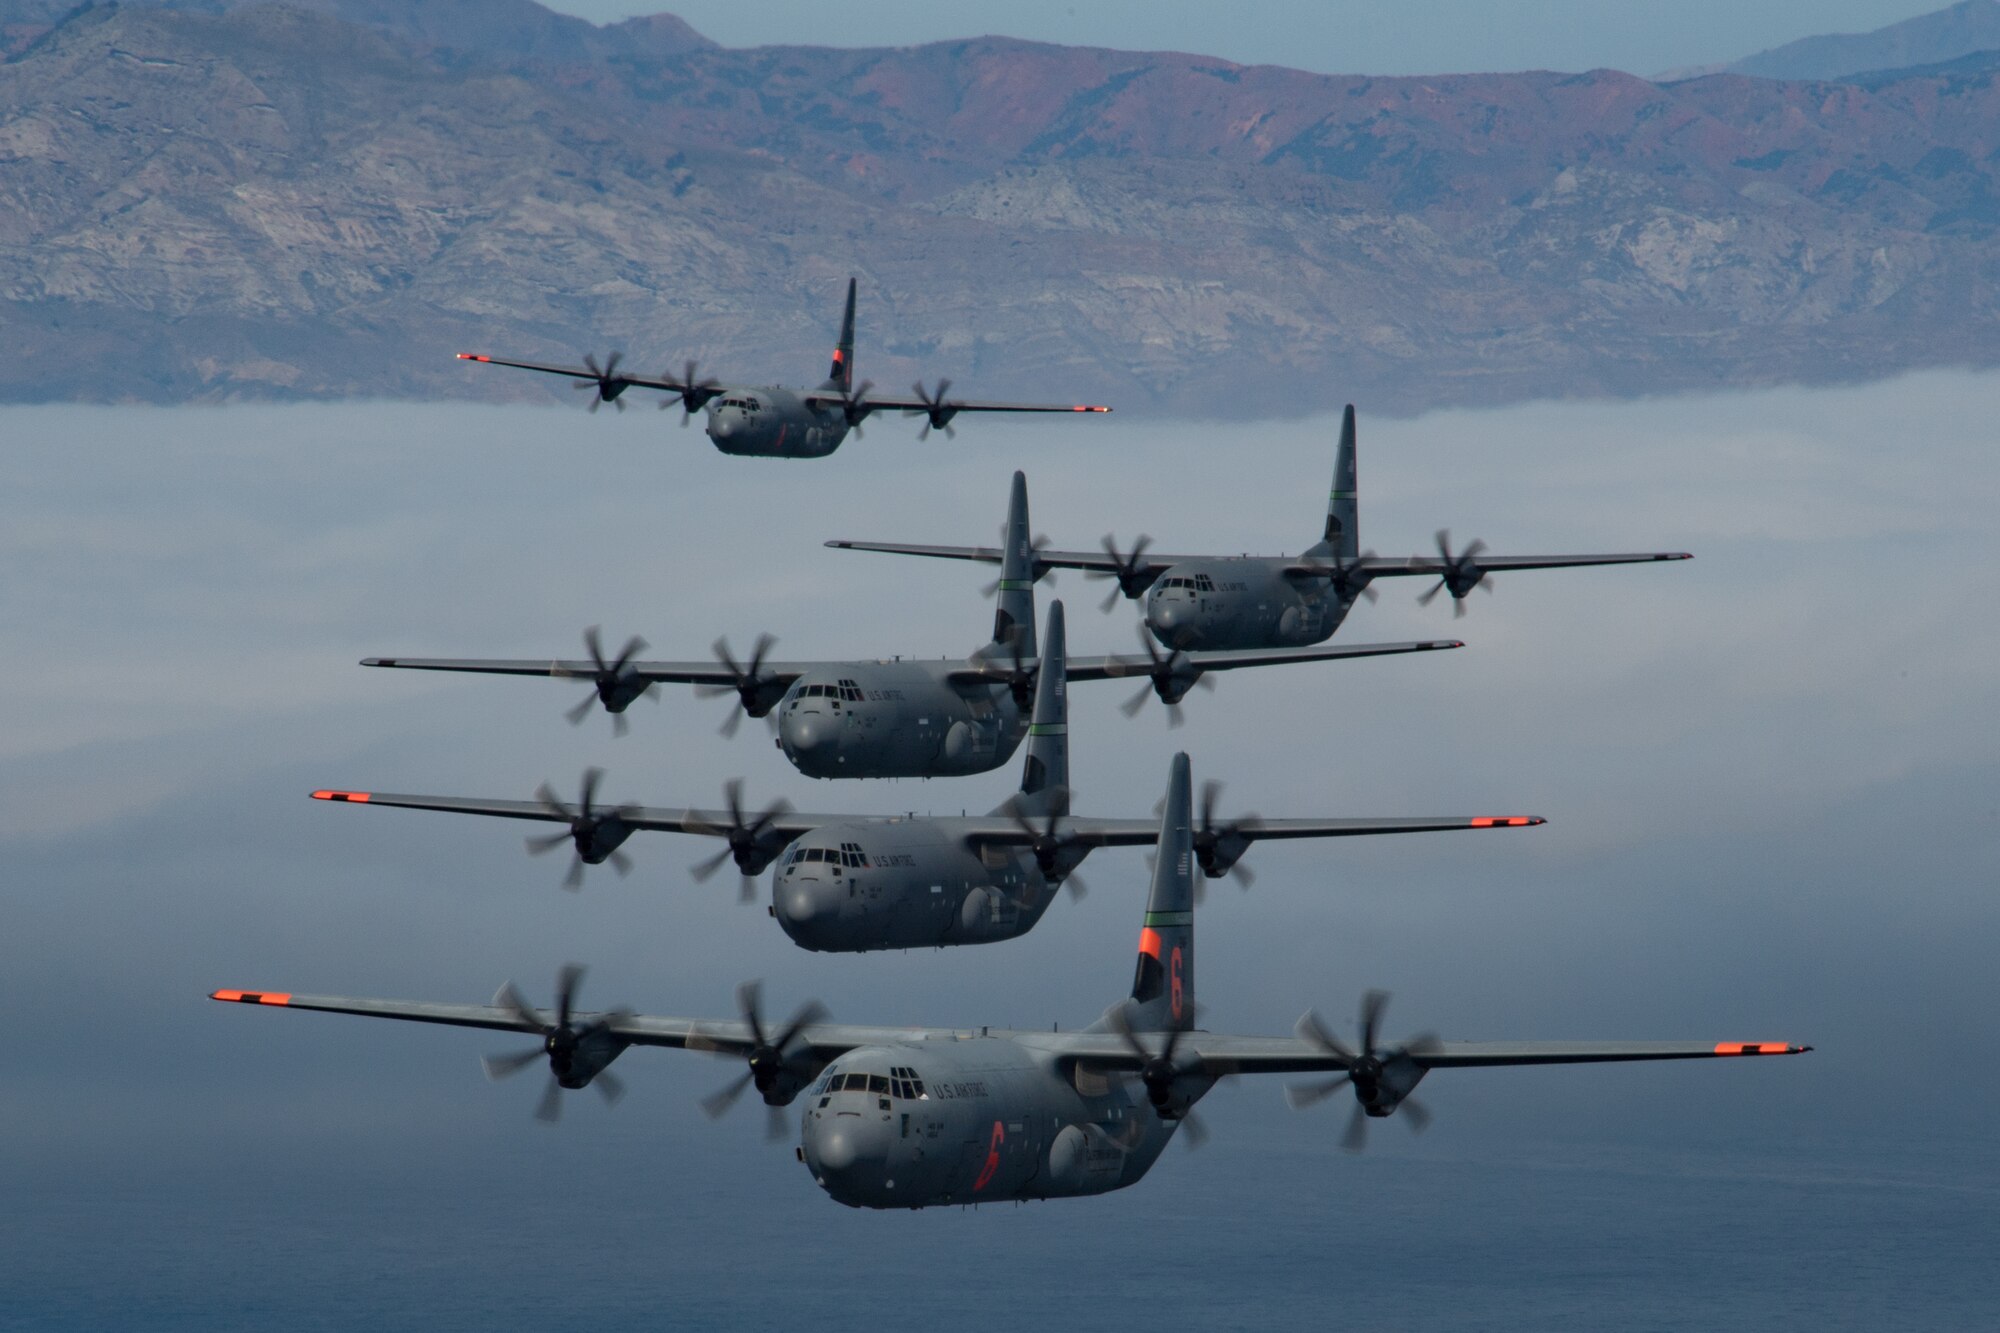 5 of 6 California Air National Guard C-130J Super Hercules aircraft fly in tight formation over the Pacific Ocean, California. May 27, 2020. California Air National Guard maintainers from the 146th Maintenance Group and aircrew from the 115th Airlift Squadron, collaborated to accomplish the launching of 6 C-130J Super Hercules aircraft for the first time in over 20 years U.S. Air National Guard by Tech. Sgt. Nieko Carzis.